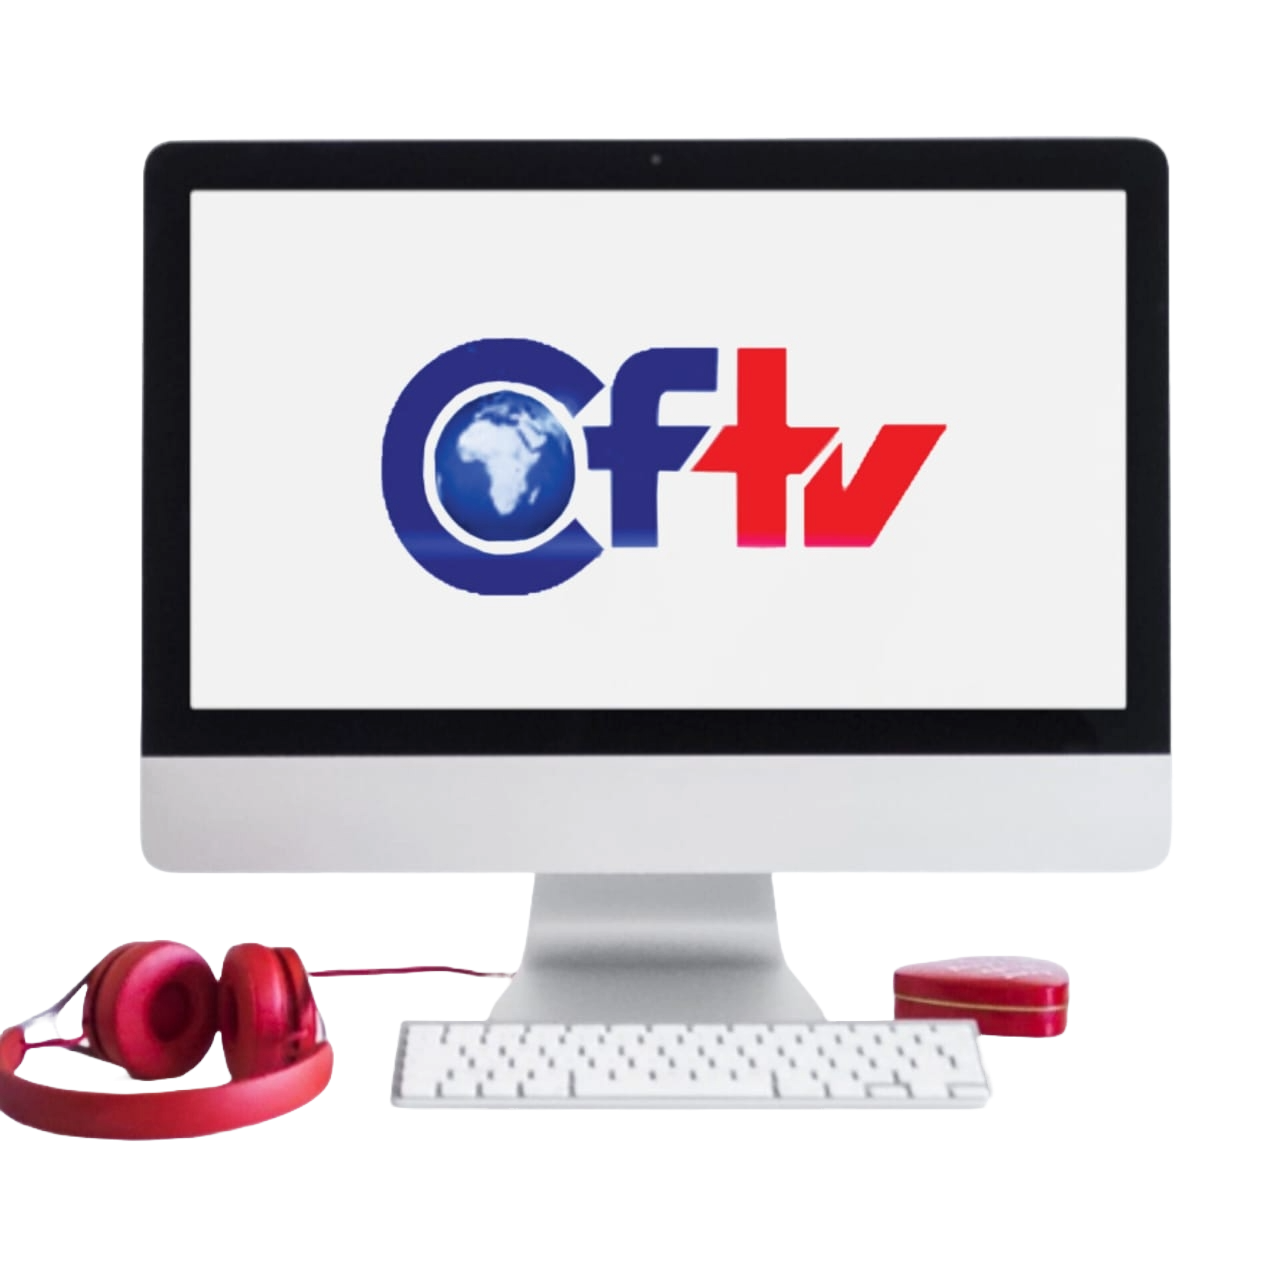 icon of a desktop monitor with CFTV